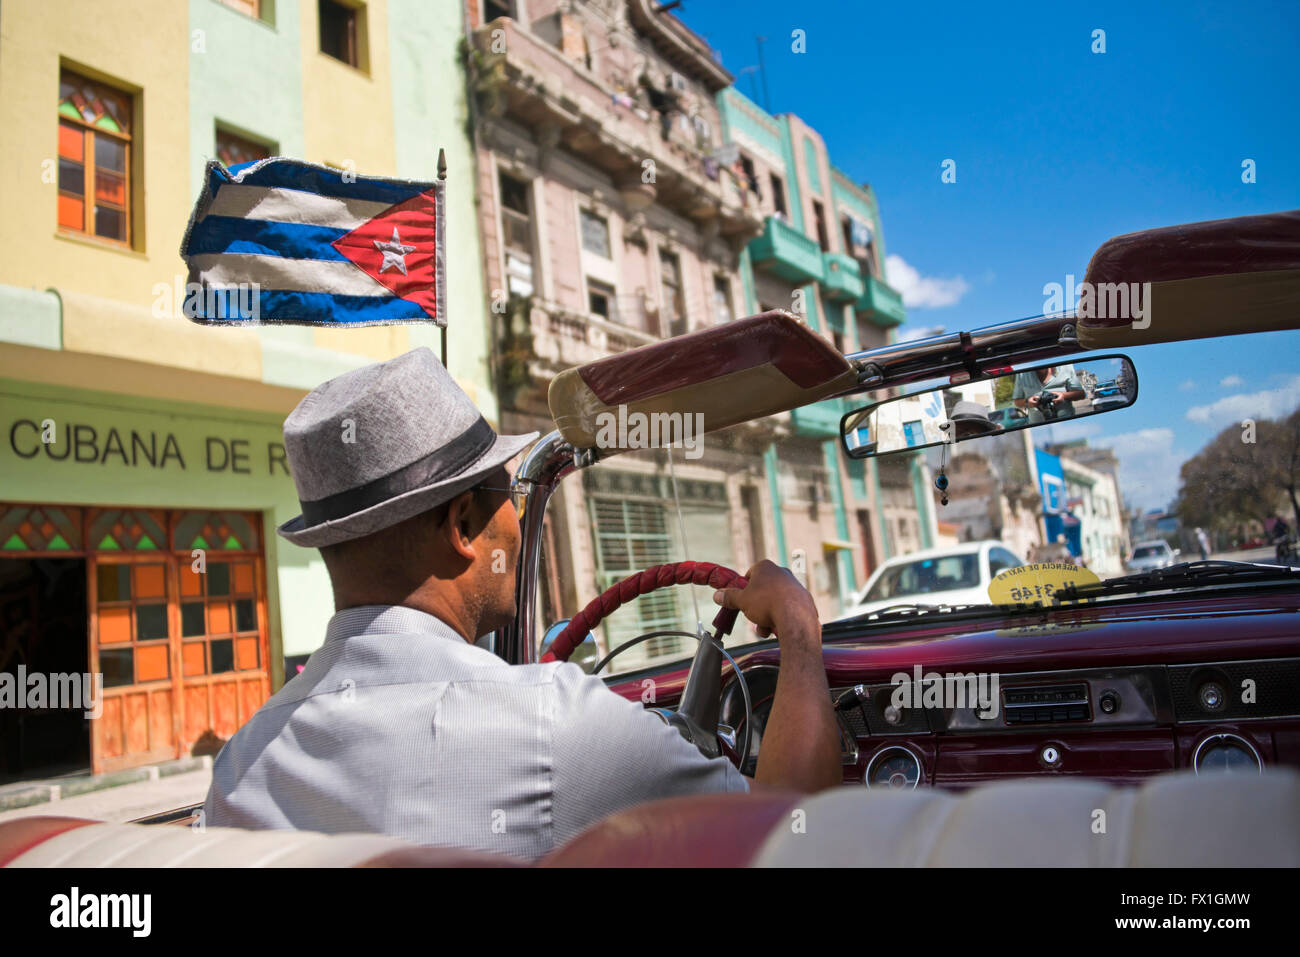 Horizontal view of old Havana from inside a classic American car, Cuba. Stock Photo